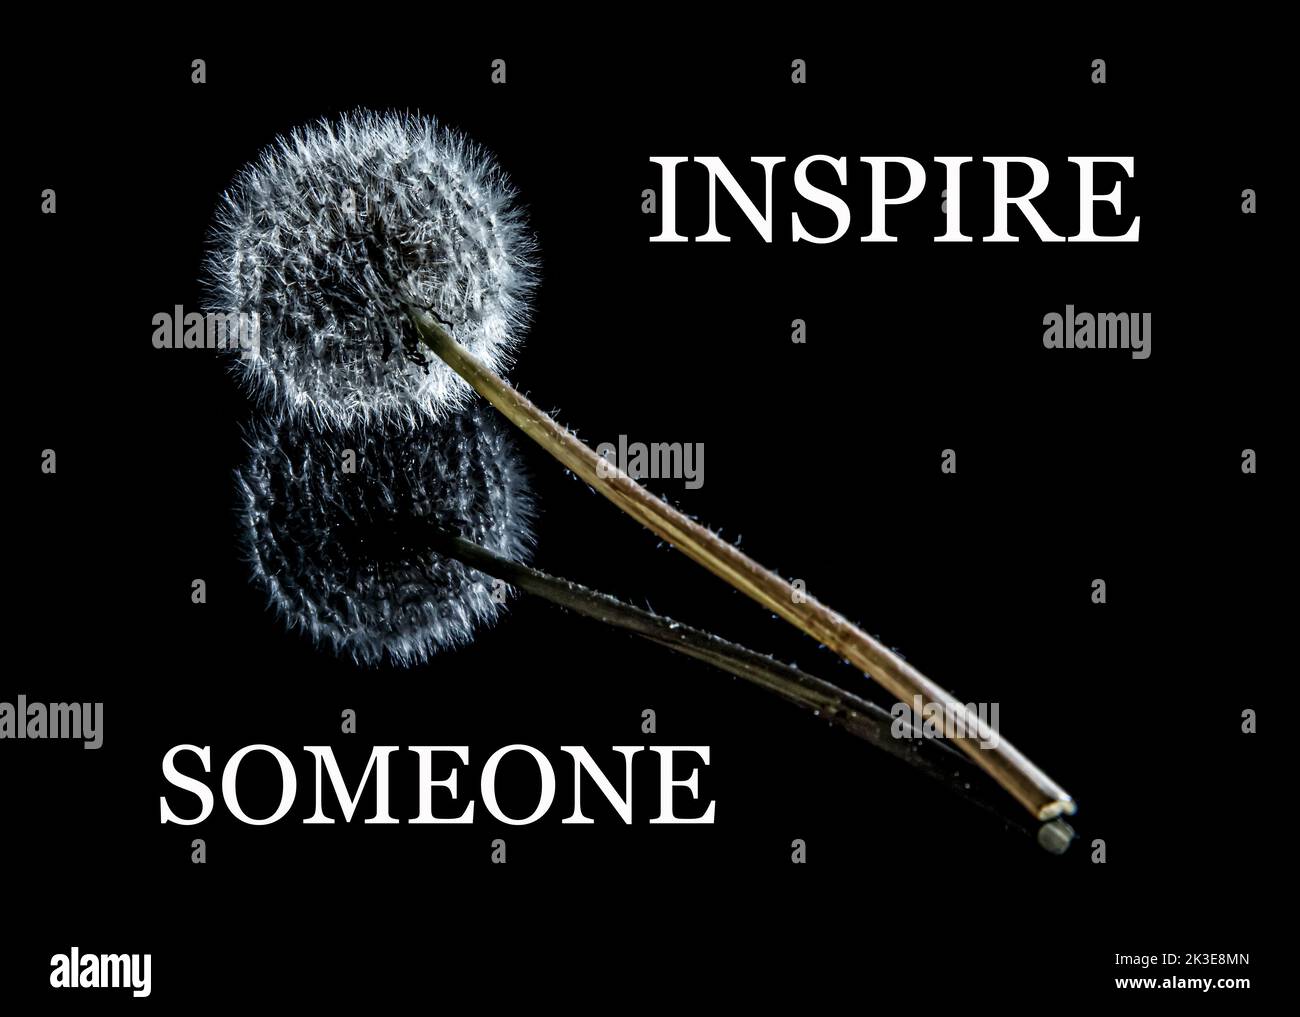 Inspirational motivational quote Inspire Someone, on black background with dandelion. Stock Photo